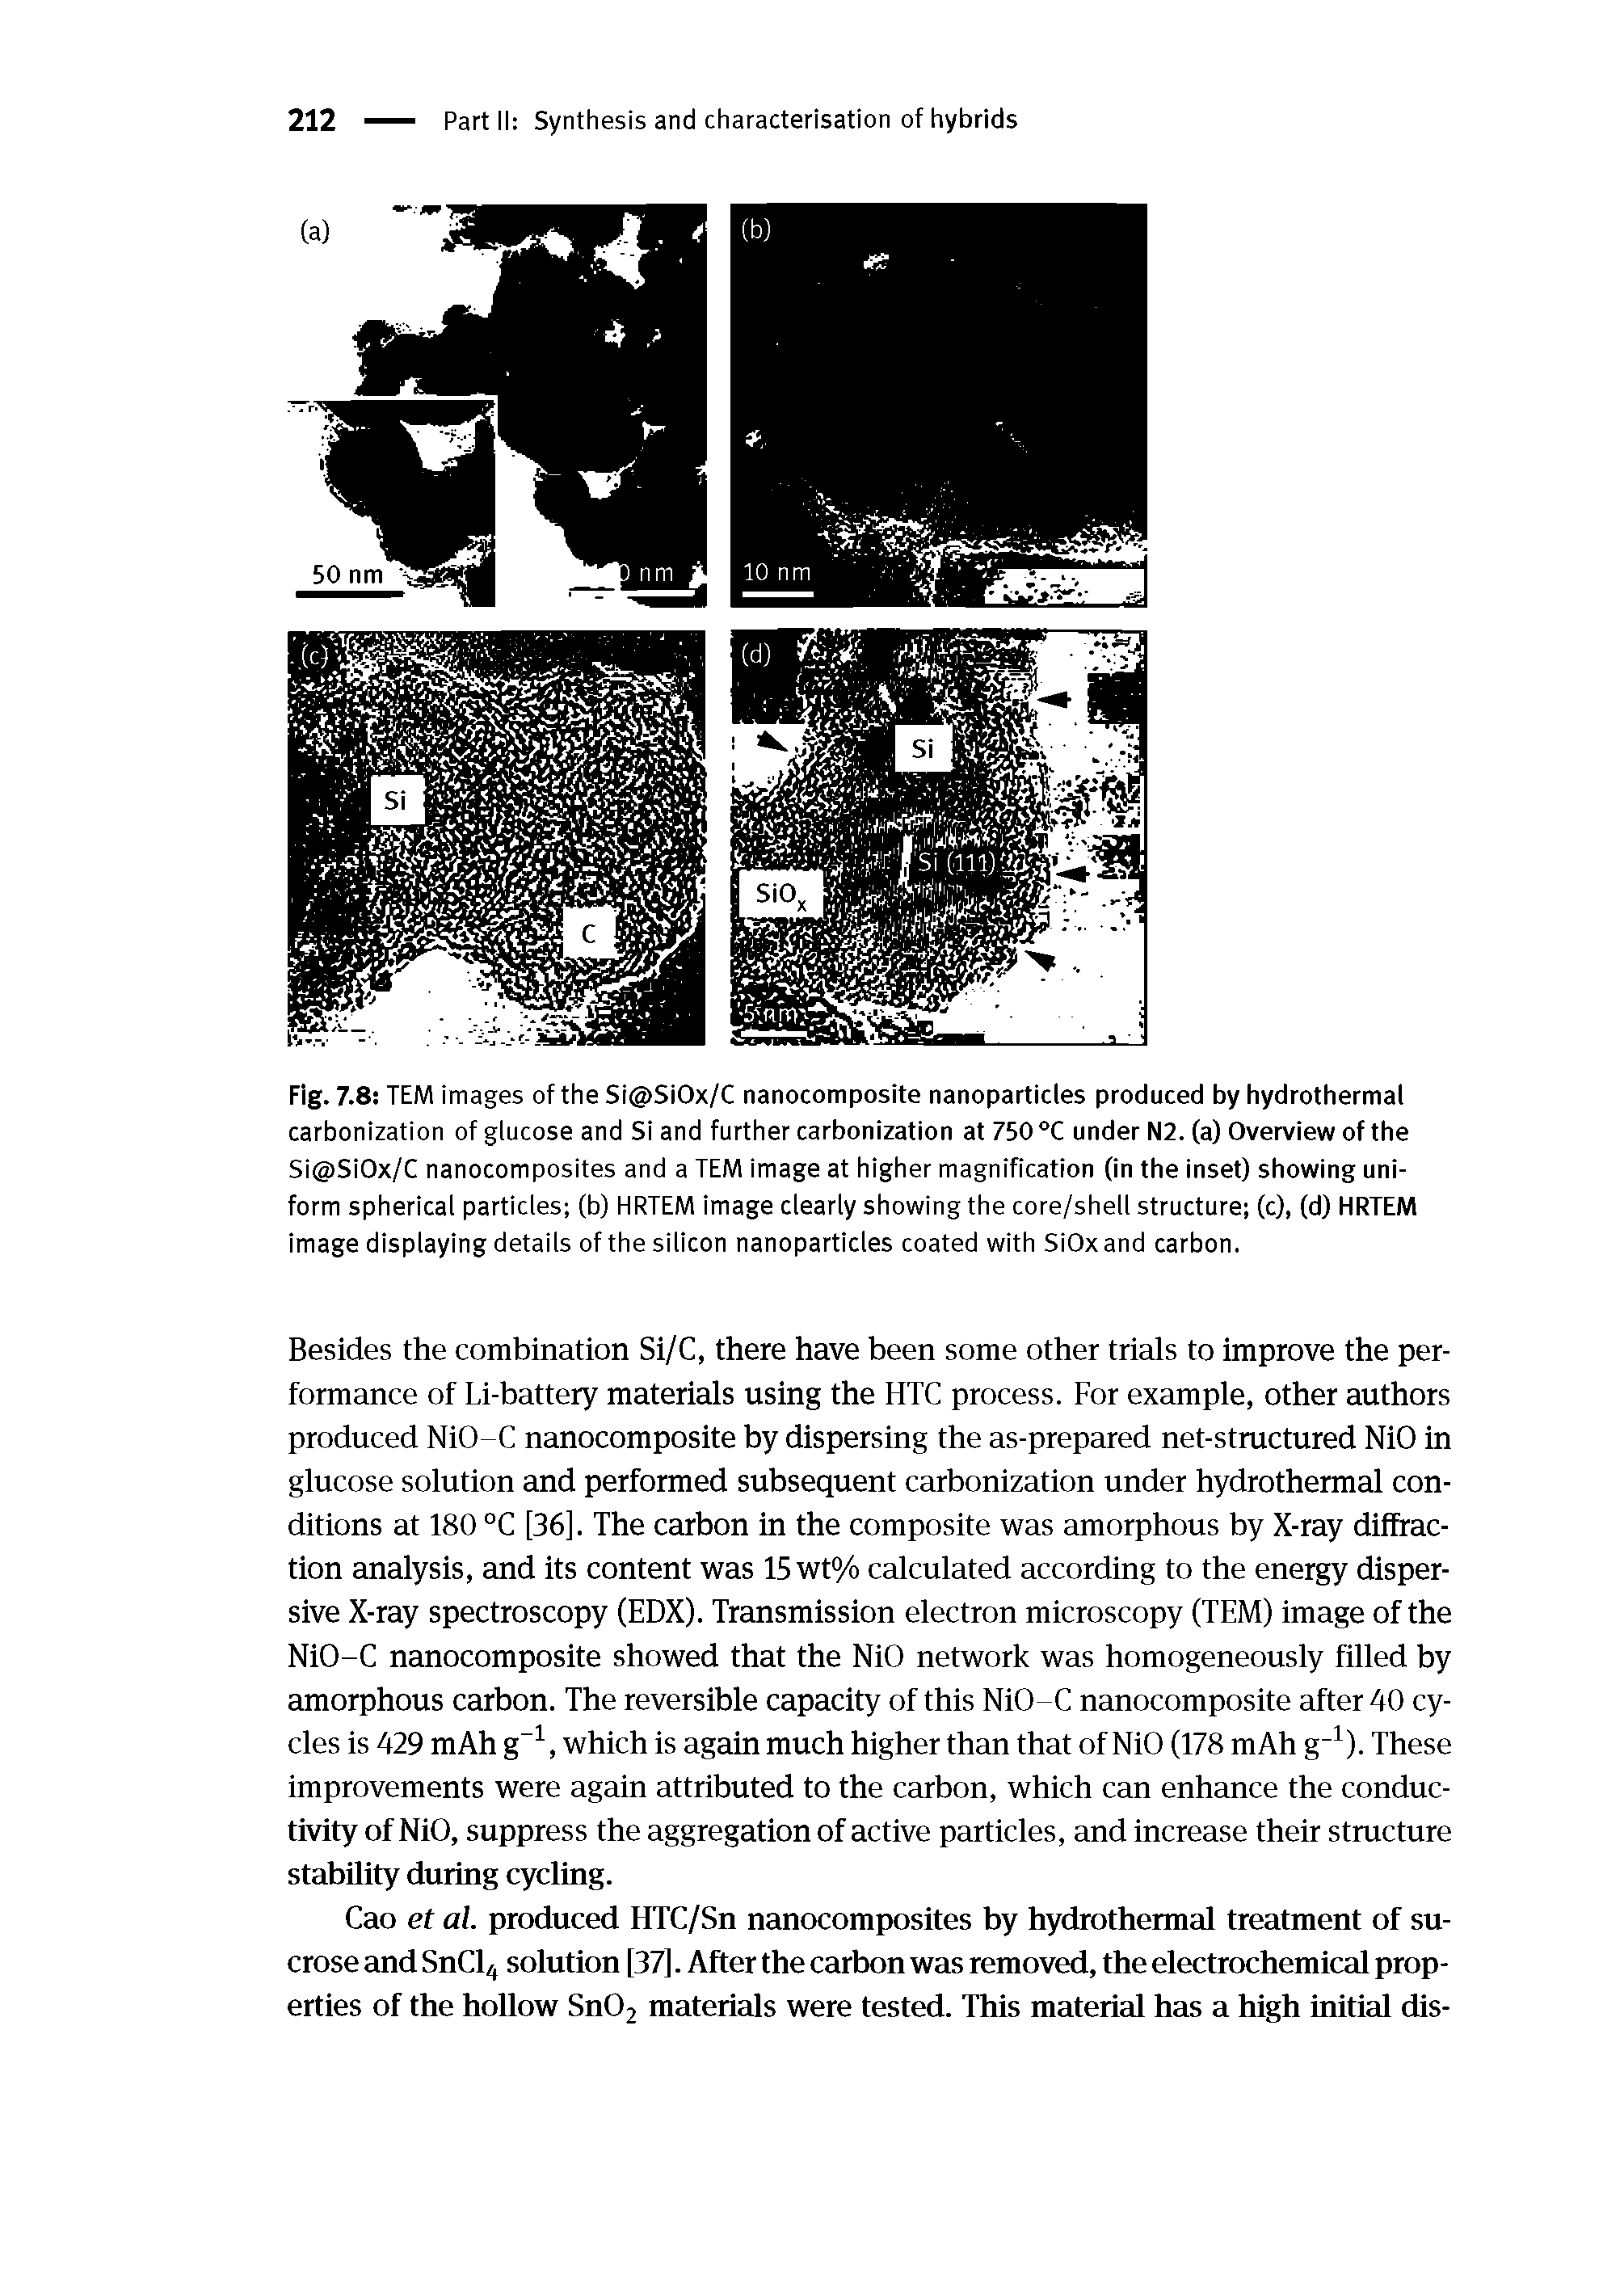 Fig. 7.8 TEM images of the Si SiOx/C nanocomposite nanoparticles produced by hydrothermal carbonization of glucose and Si and further carbonization at 750 °C under N2. (a) Overview of the Si SiOx/C nanocomposites and a TEM image at higher magnification (in the inset) showing uniform spherical particles (b) HRTEM image clearly showing the core/shell structure (c), (d) HRTEM image displaying details of the silicon nanoparticles coated with SiOxand carbon.